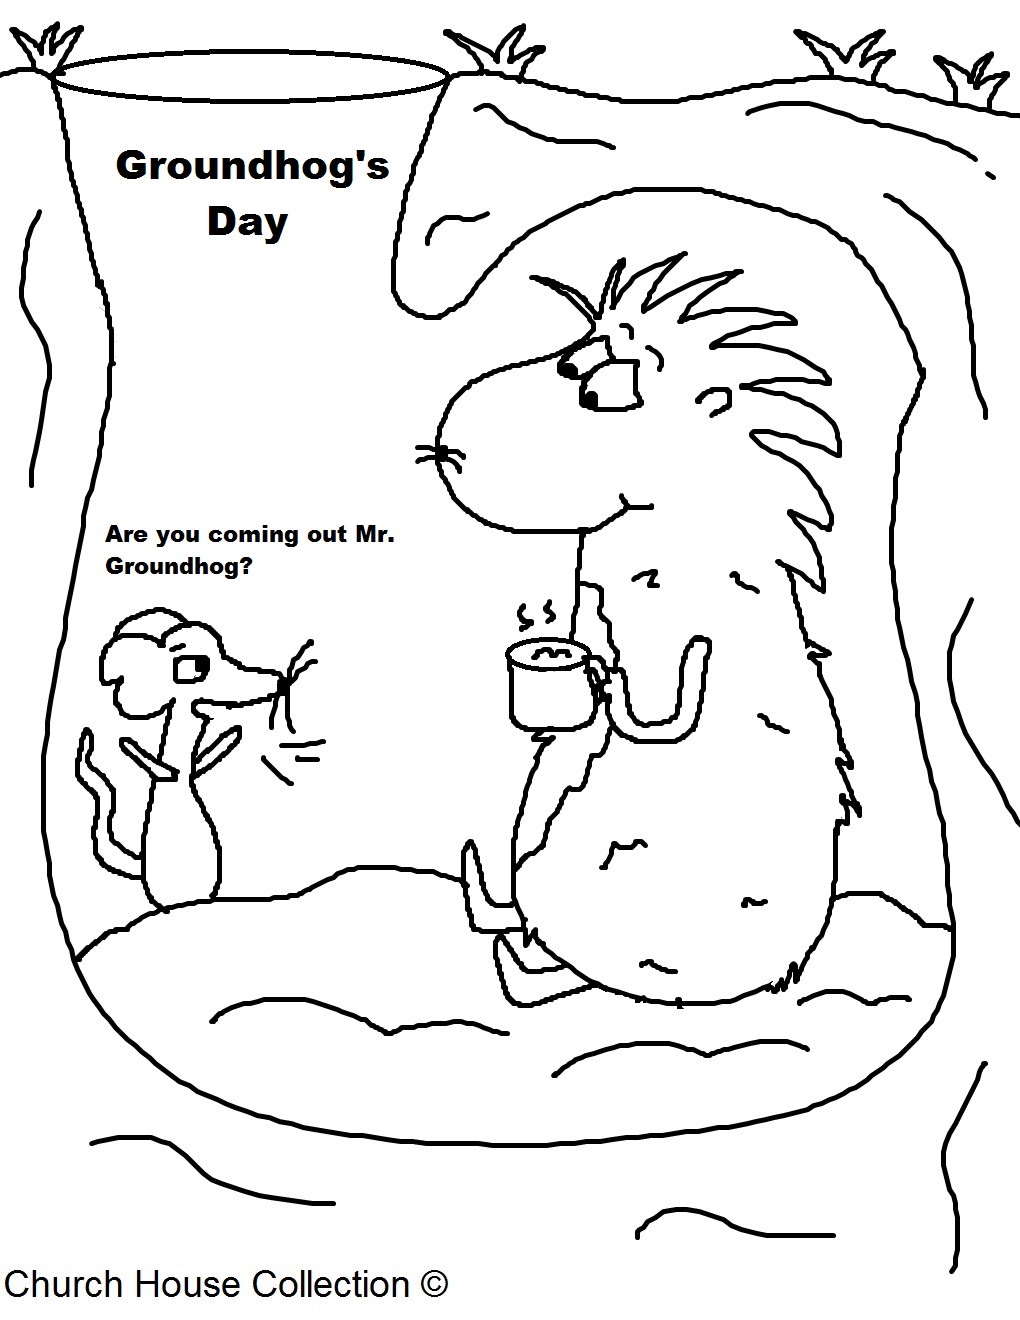 Free printable Groundhog Coloring pages for school With and without words See more Groundhog Coloring Pages For School